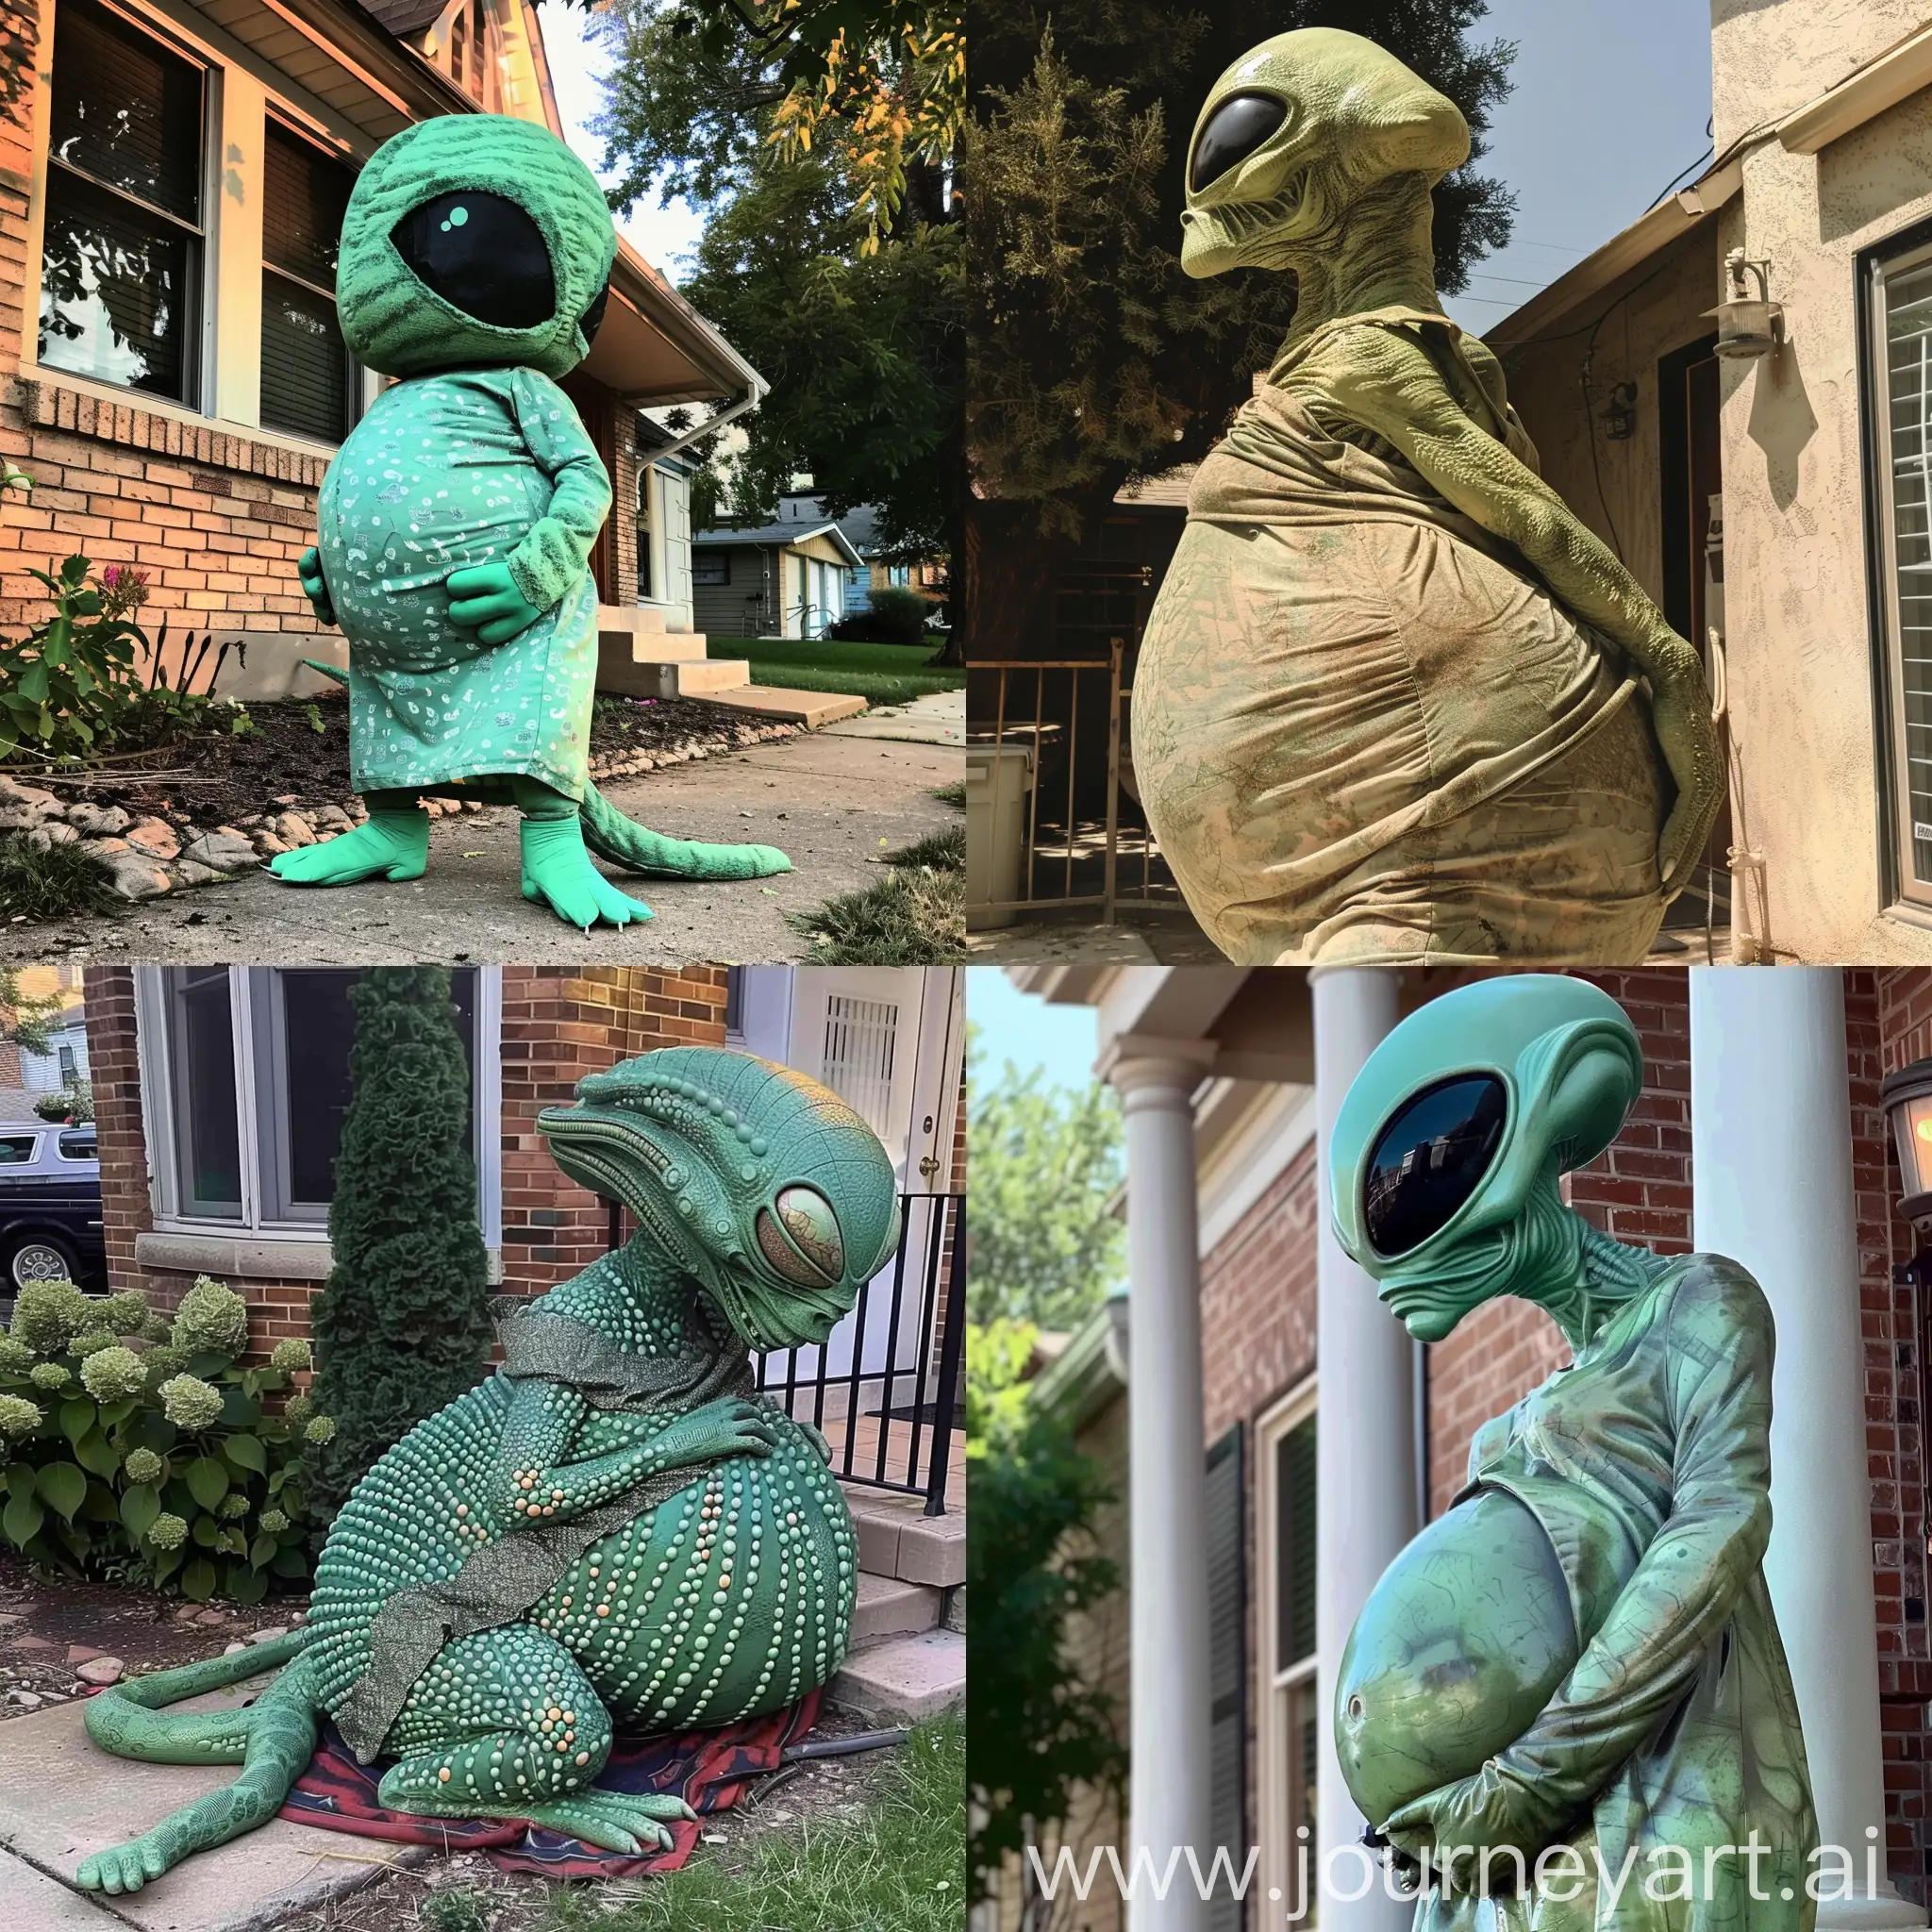 A female green alien, 7 feet tall, Very Pregnant, The alien's pregnant belly is very large. The alien is creeping around outside someone's house.